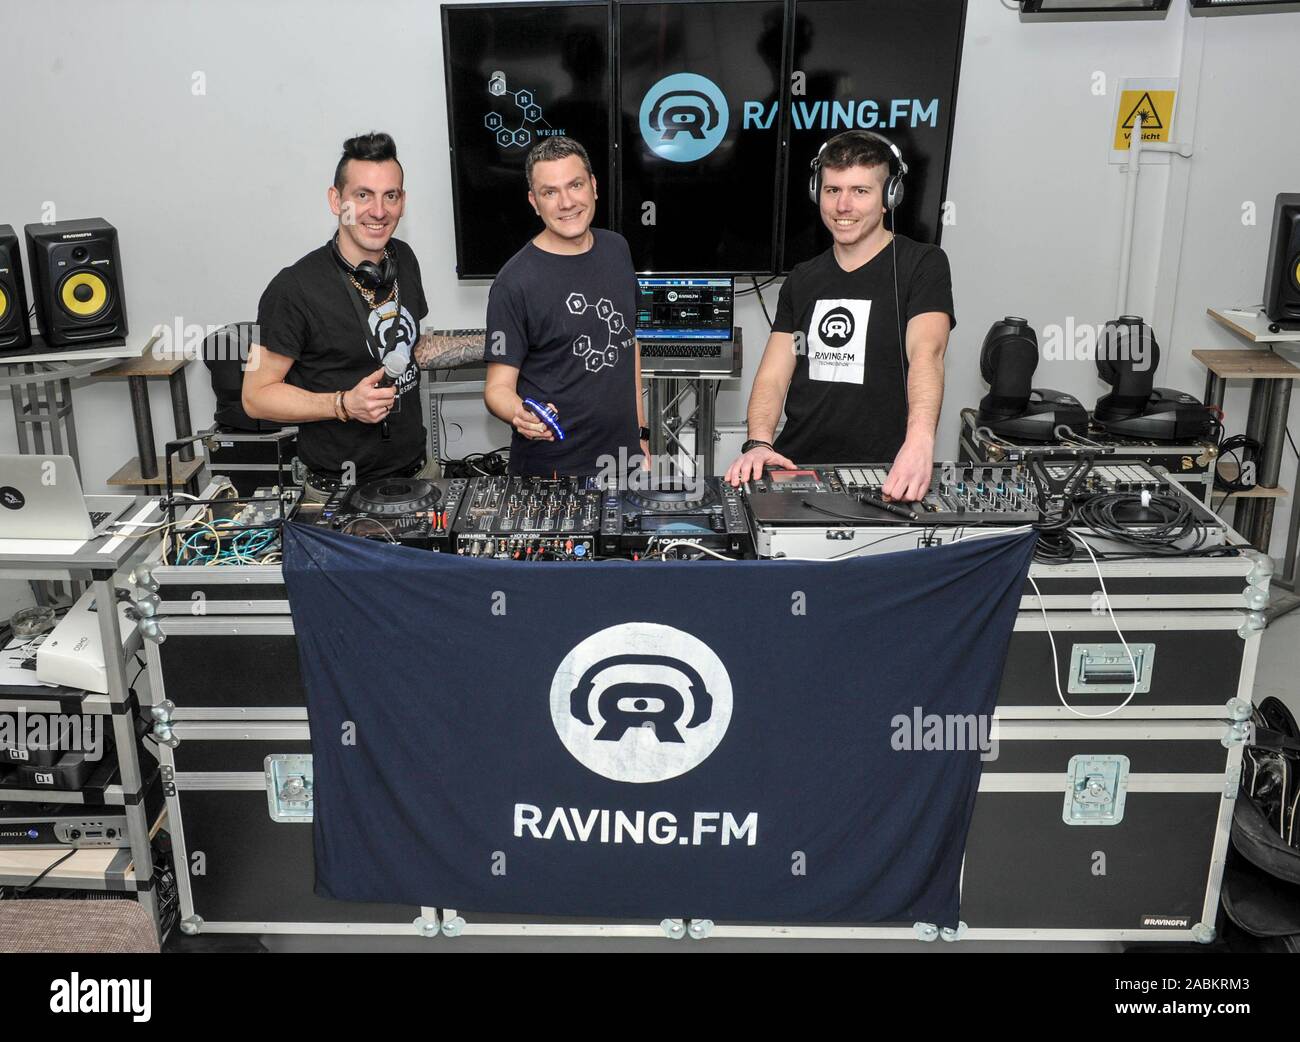 Leonardo Javier Garcia (l.) and Juan Pablo Toculescu (r.) from the Munich techno web radio station 'Raving.fm', recorded in their studio in a former print shop in Untergiesing. In the middle Andreas Drescher from the Munich artist collective 'Dreschwerk'. [automated translation] Stock Photo